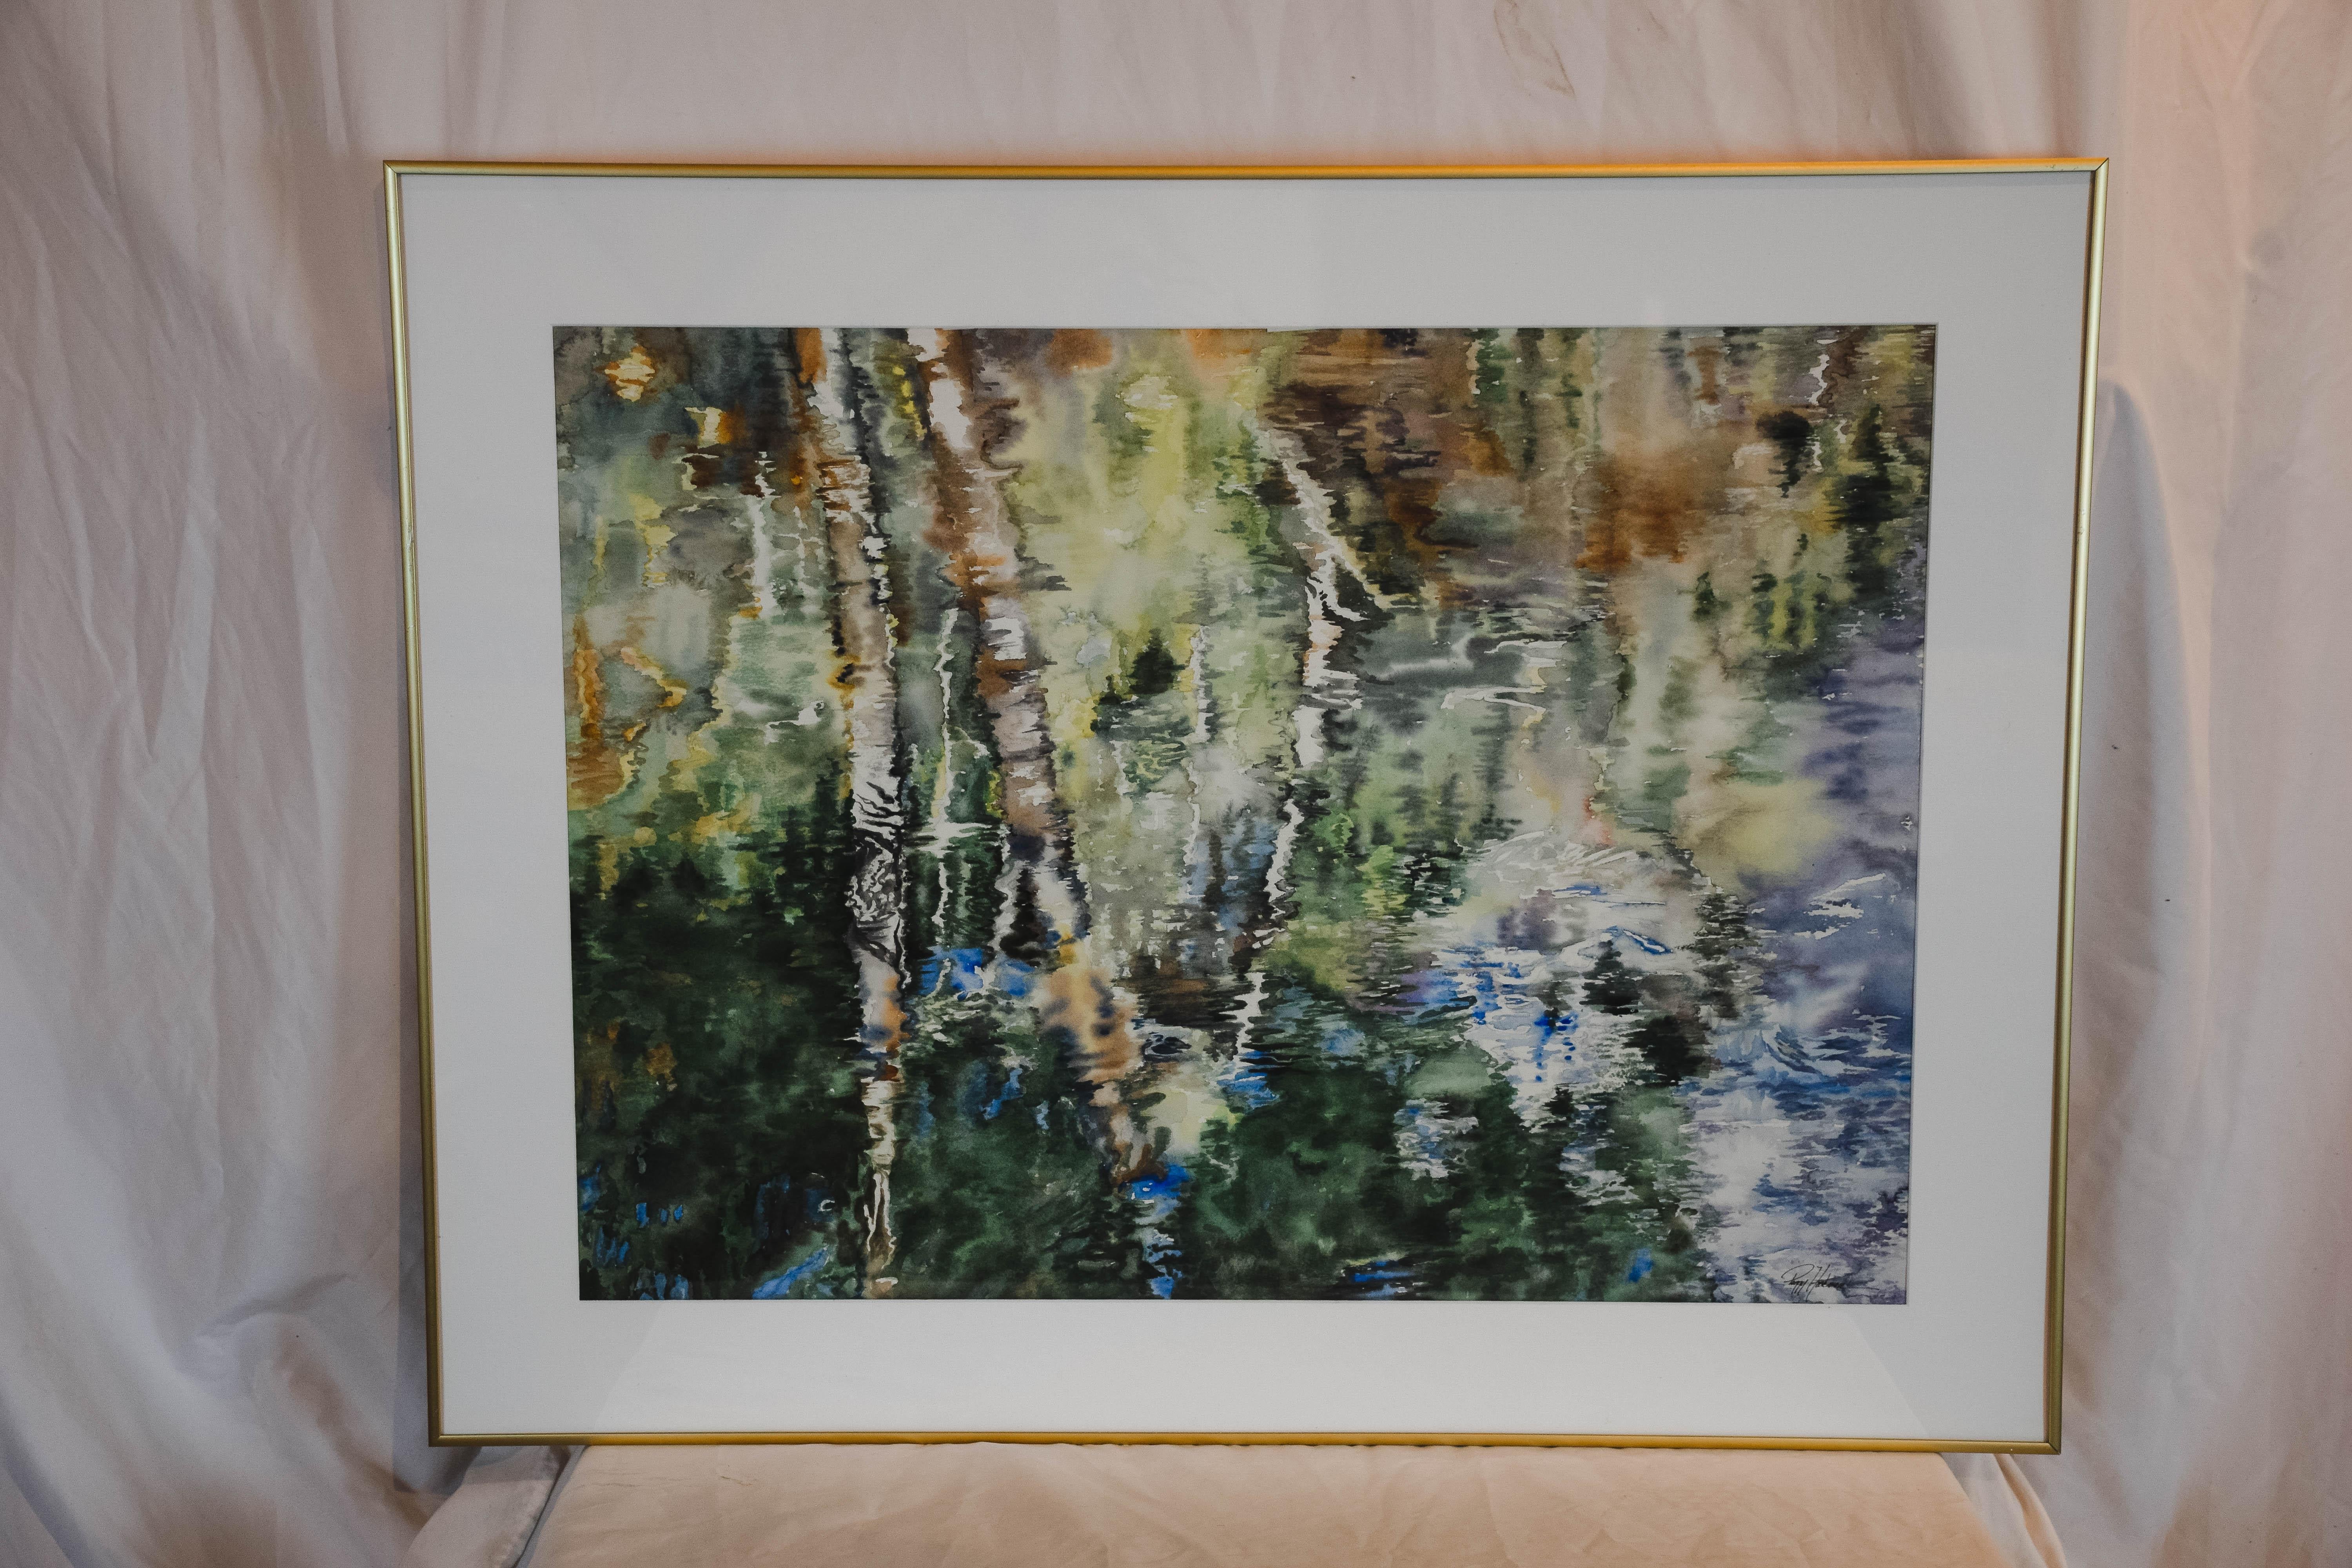 With its soothing nature inspired colors, this watercolor evokes an afternoon in the woods. This painting would be a welcome addition in any room.